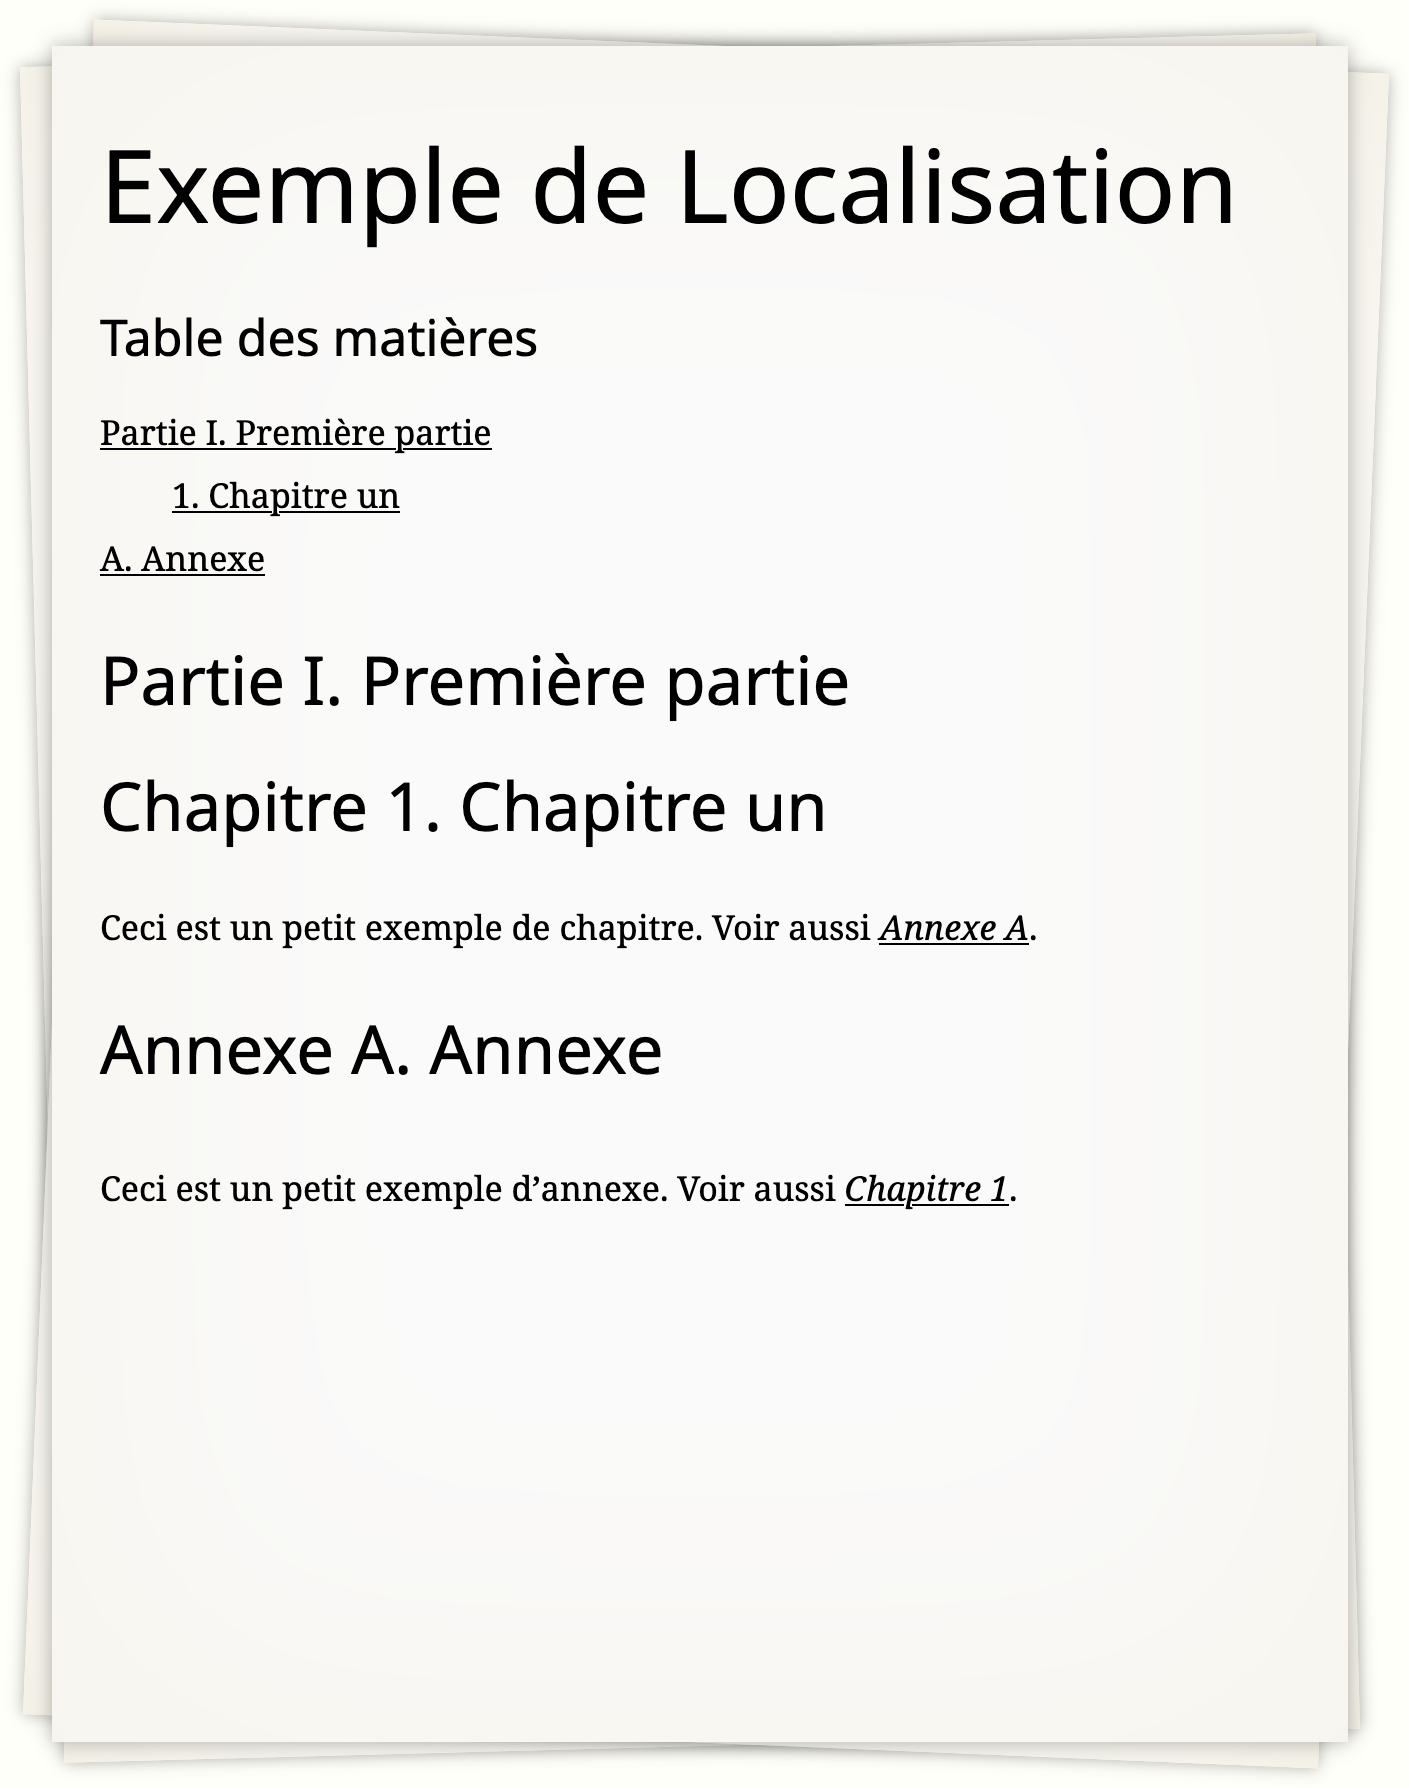 The published book again, this time with French generated text.